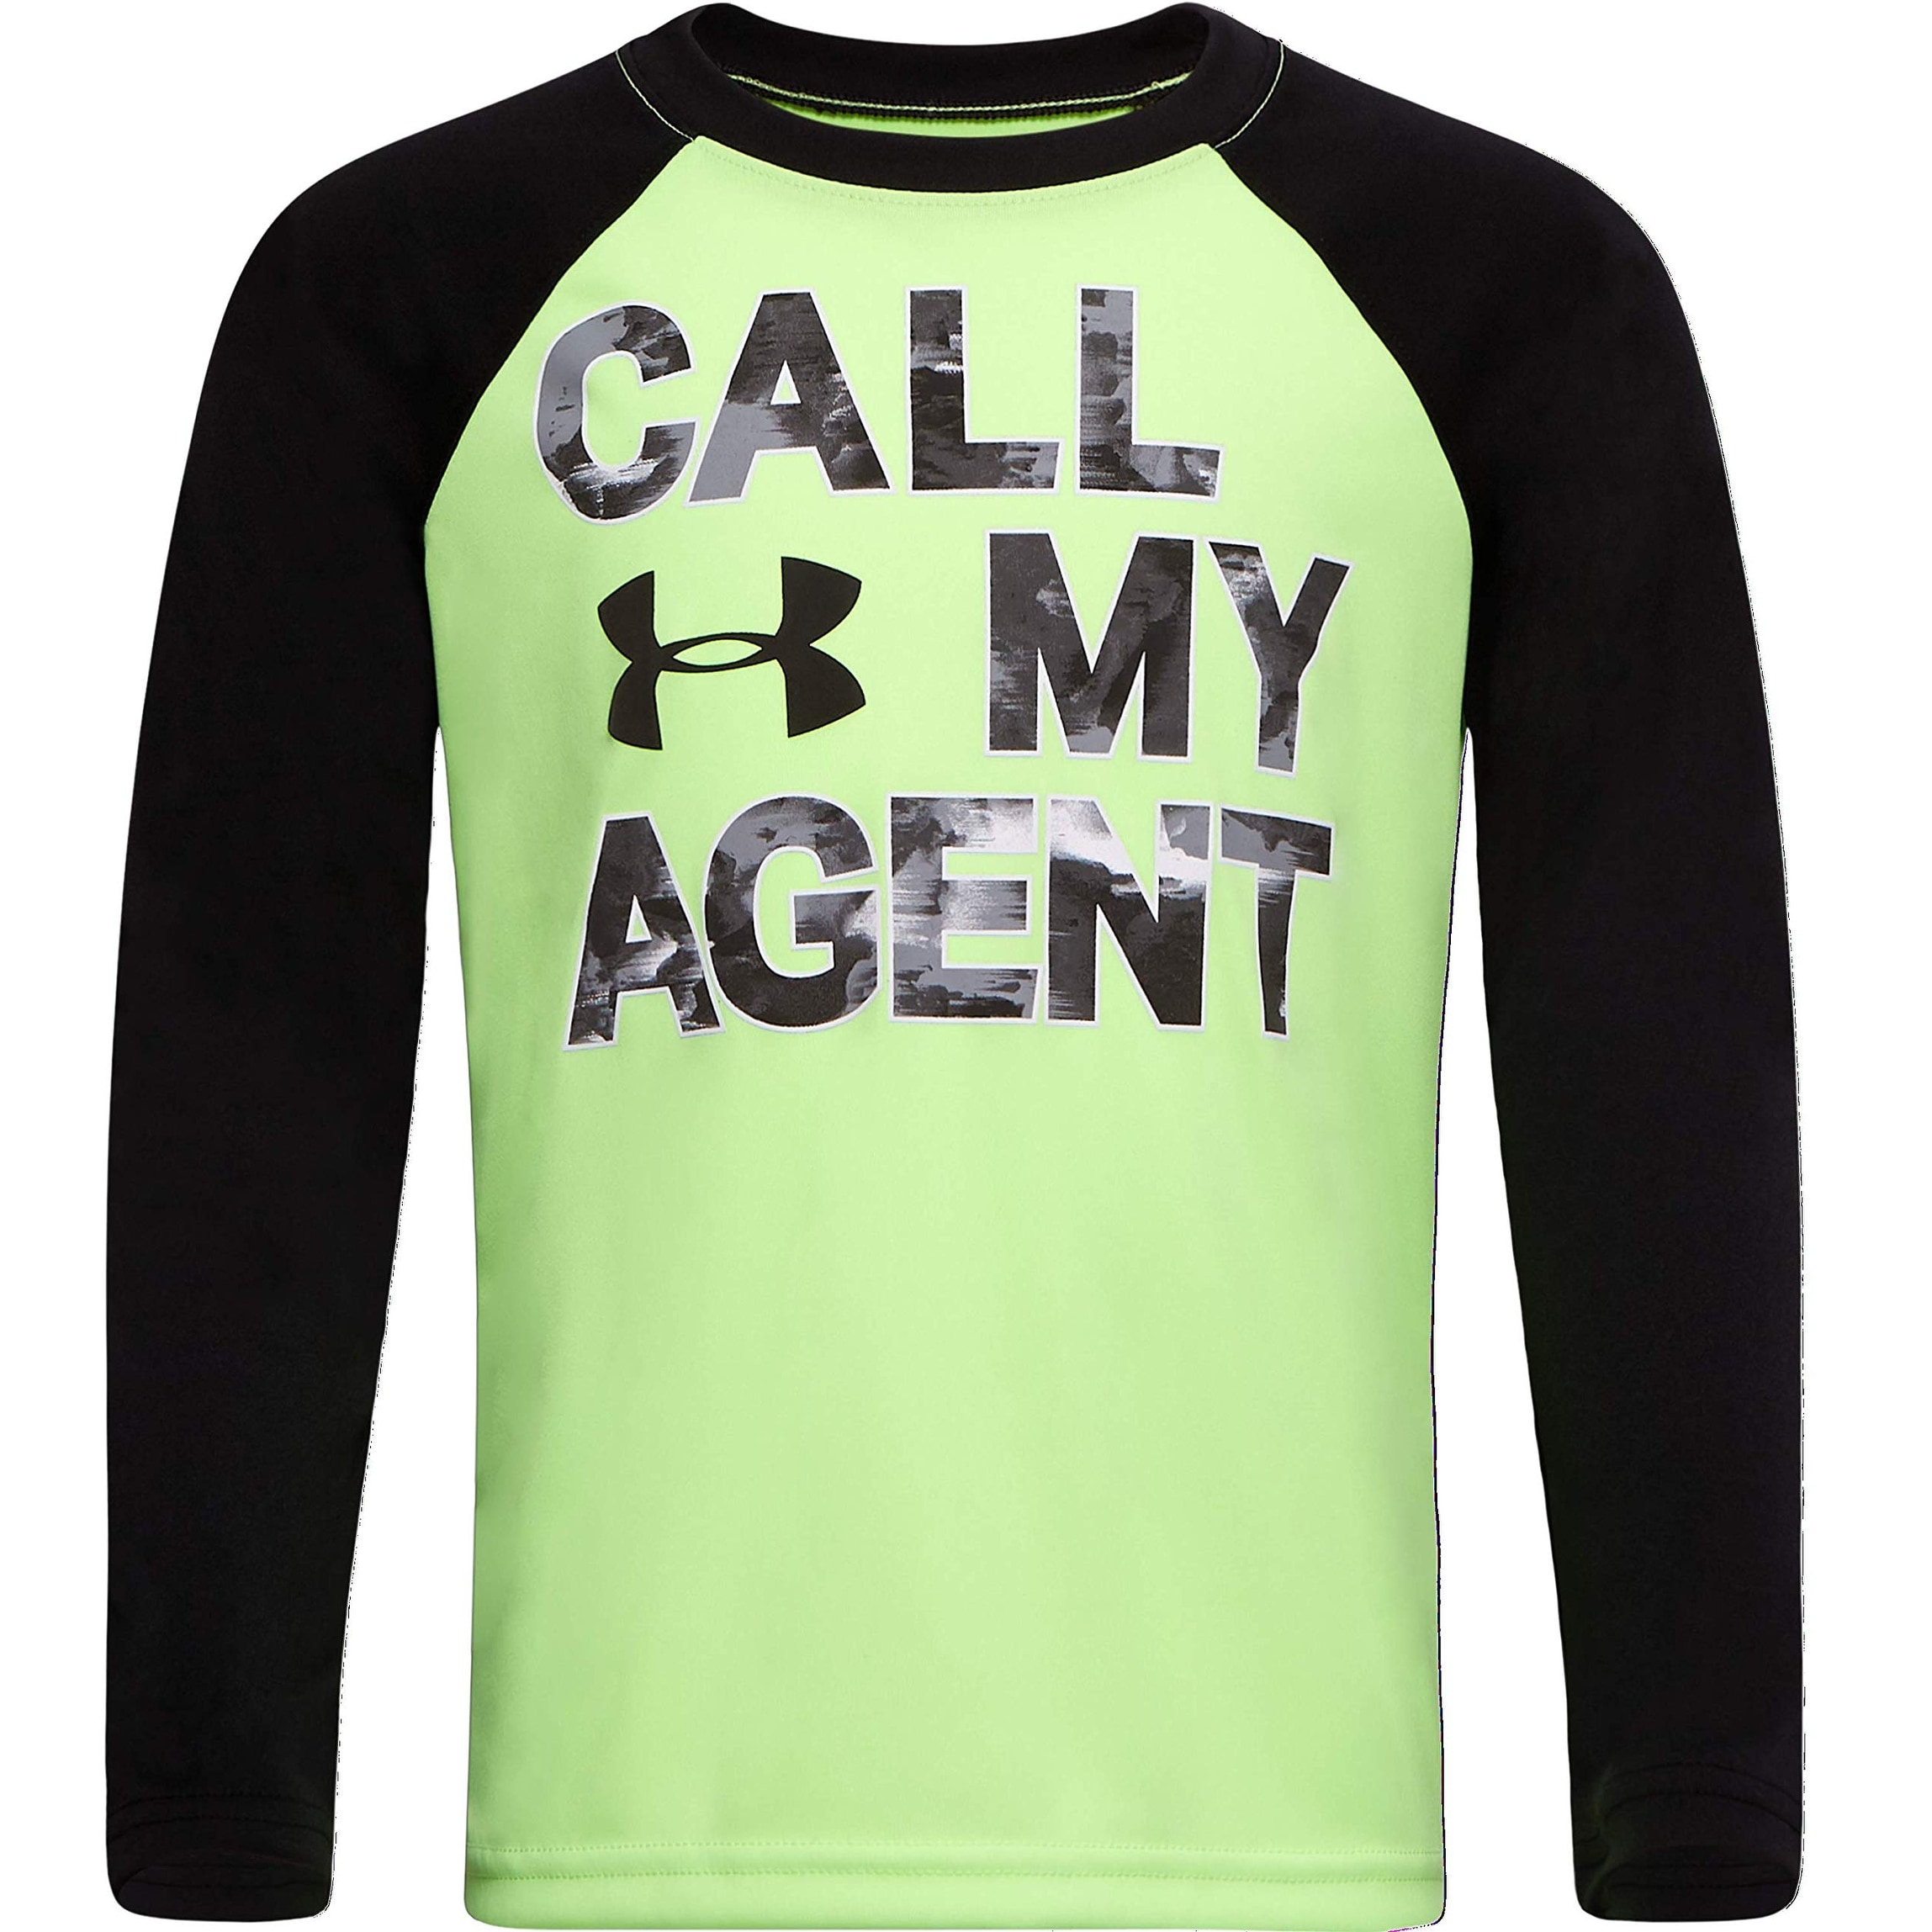 lime green under armour t shirt